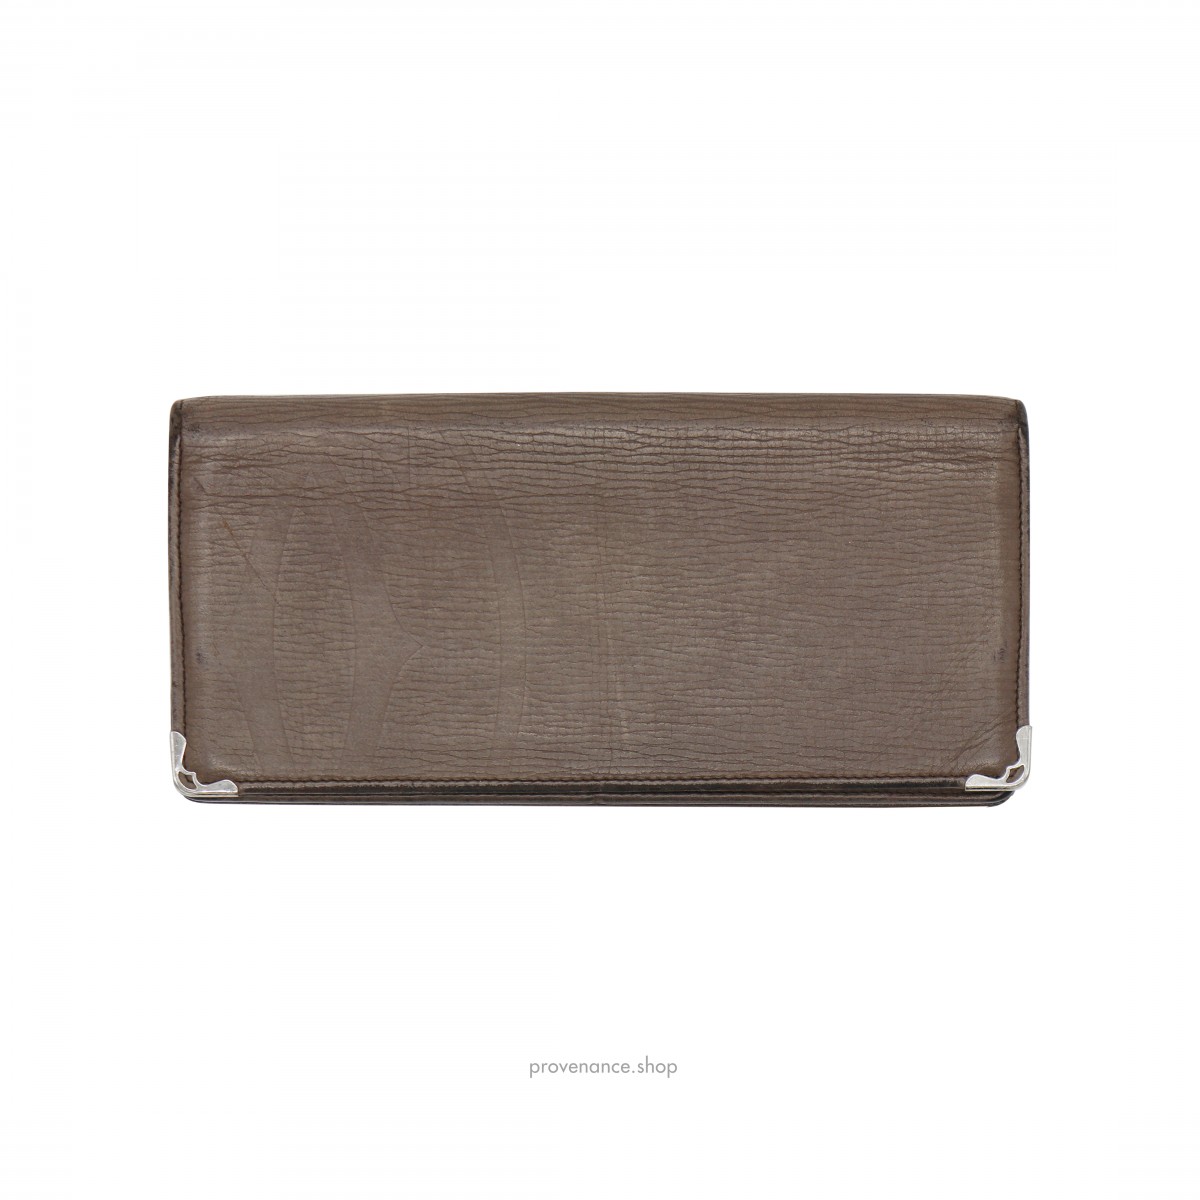 Cartier Long Wallet - Taupe Leather - 1